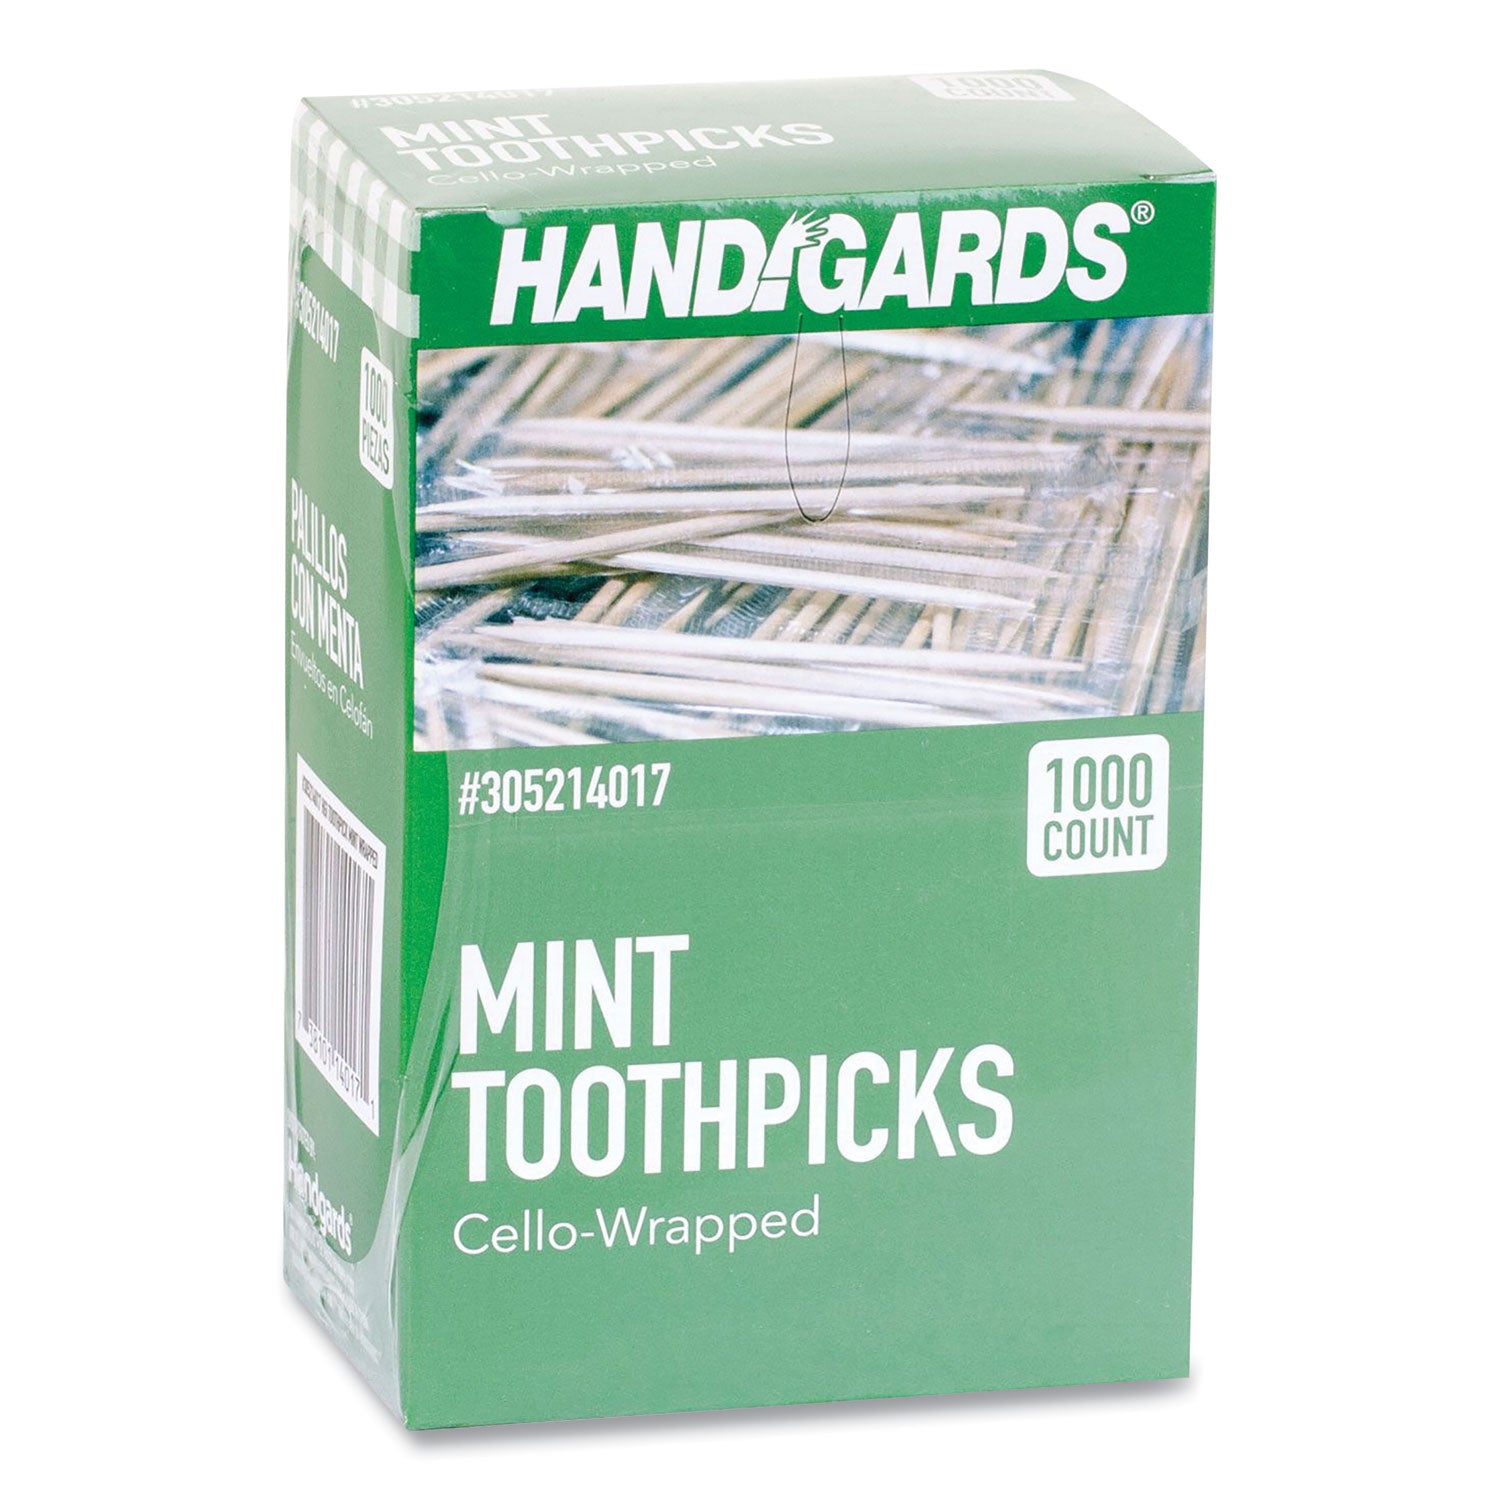 individually-wrapped-round-wood-mint-toothpicks-4-natural-1000-box-12-boxes-carton_hdg426605 - 1